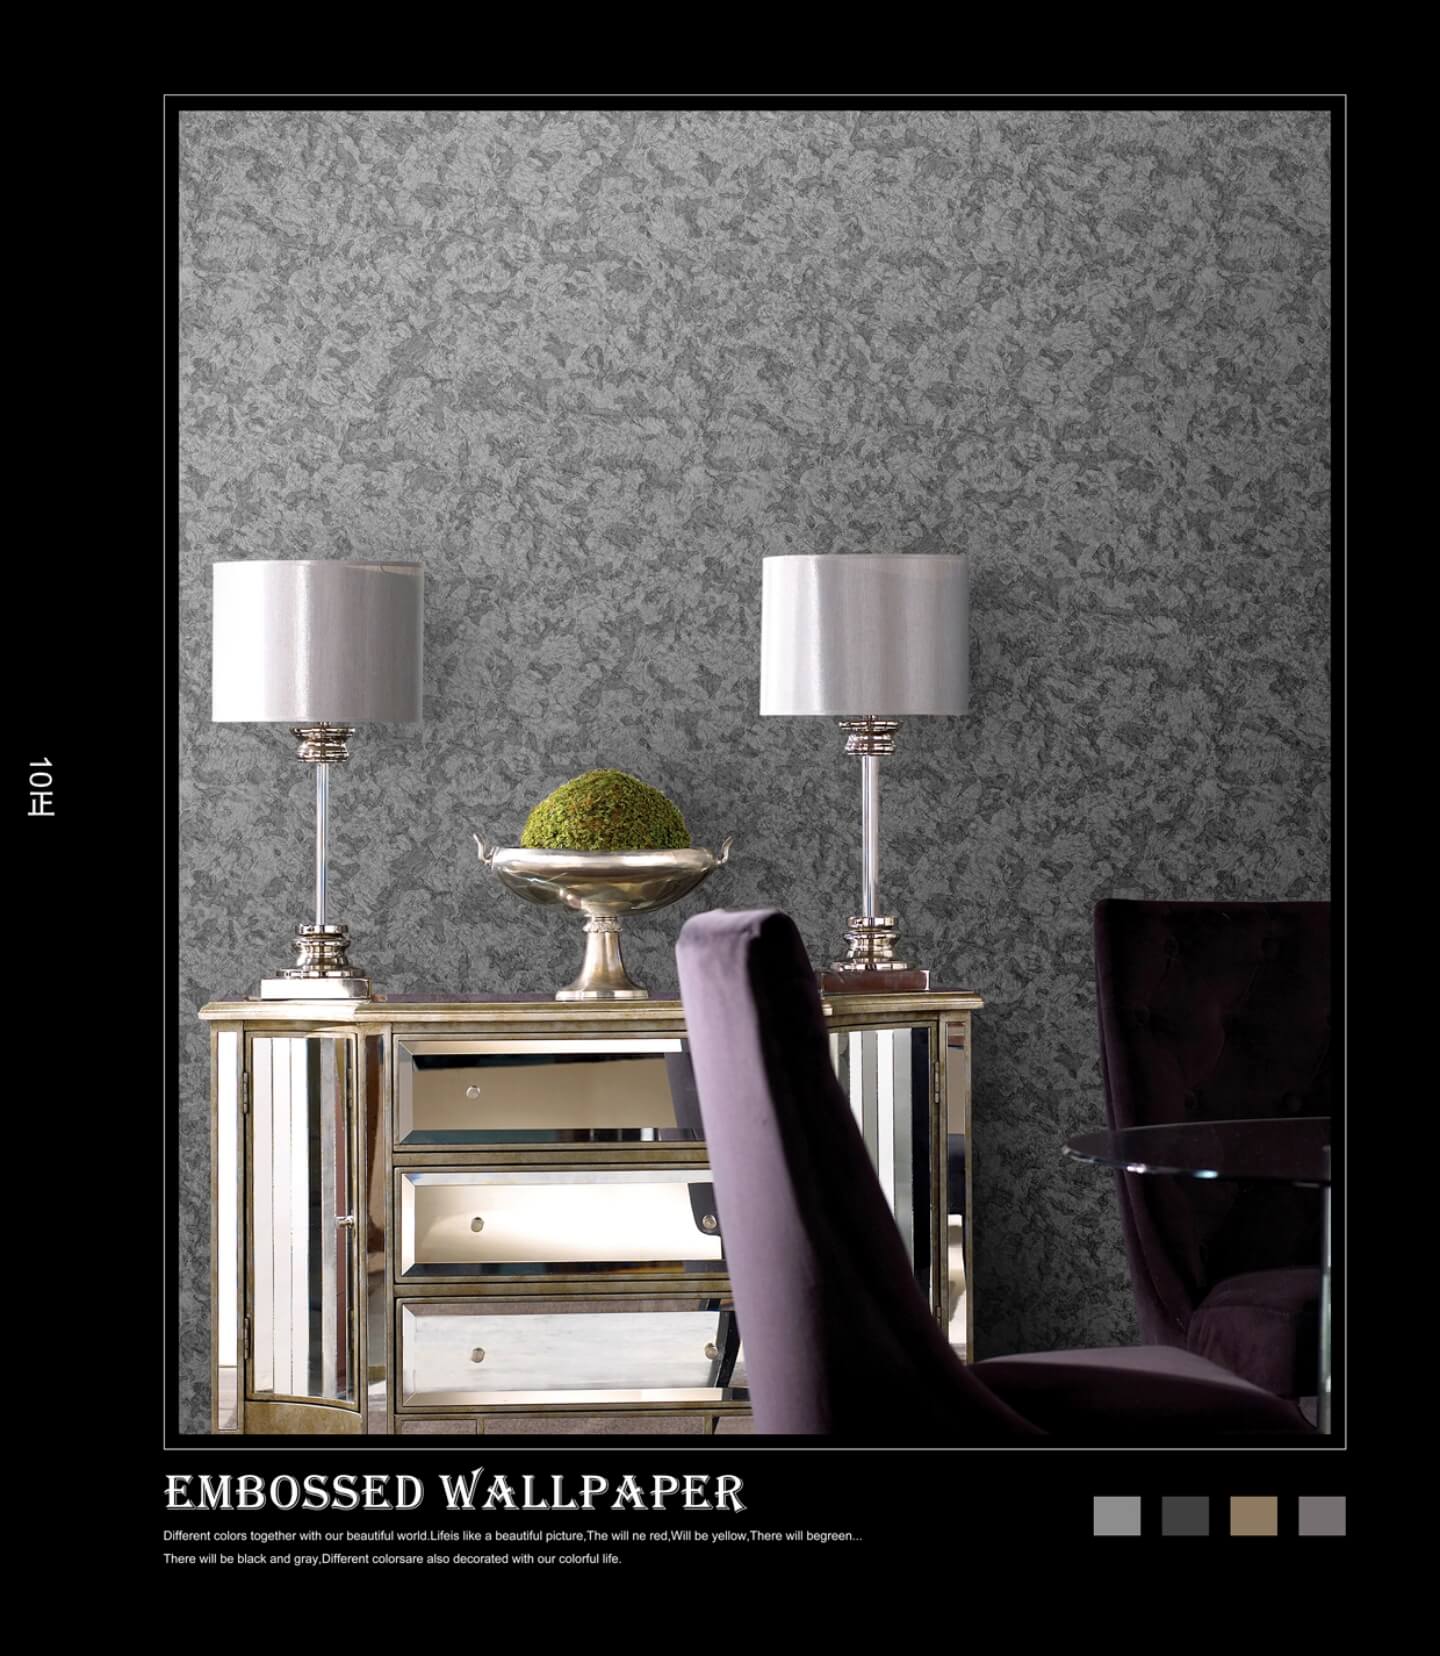 Multicolor Non-Adhesive 3D Designer Wallpaper Suitable For Bedroom, Living Room, Office, High-Quality PVC Water-resistant Wallpapers (5)